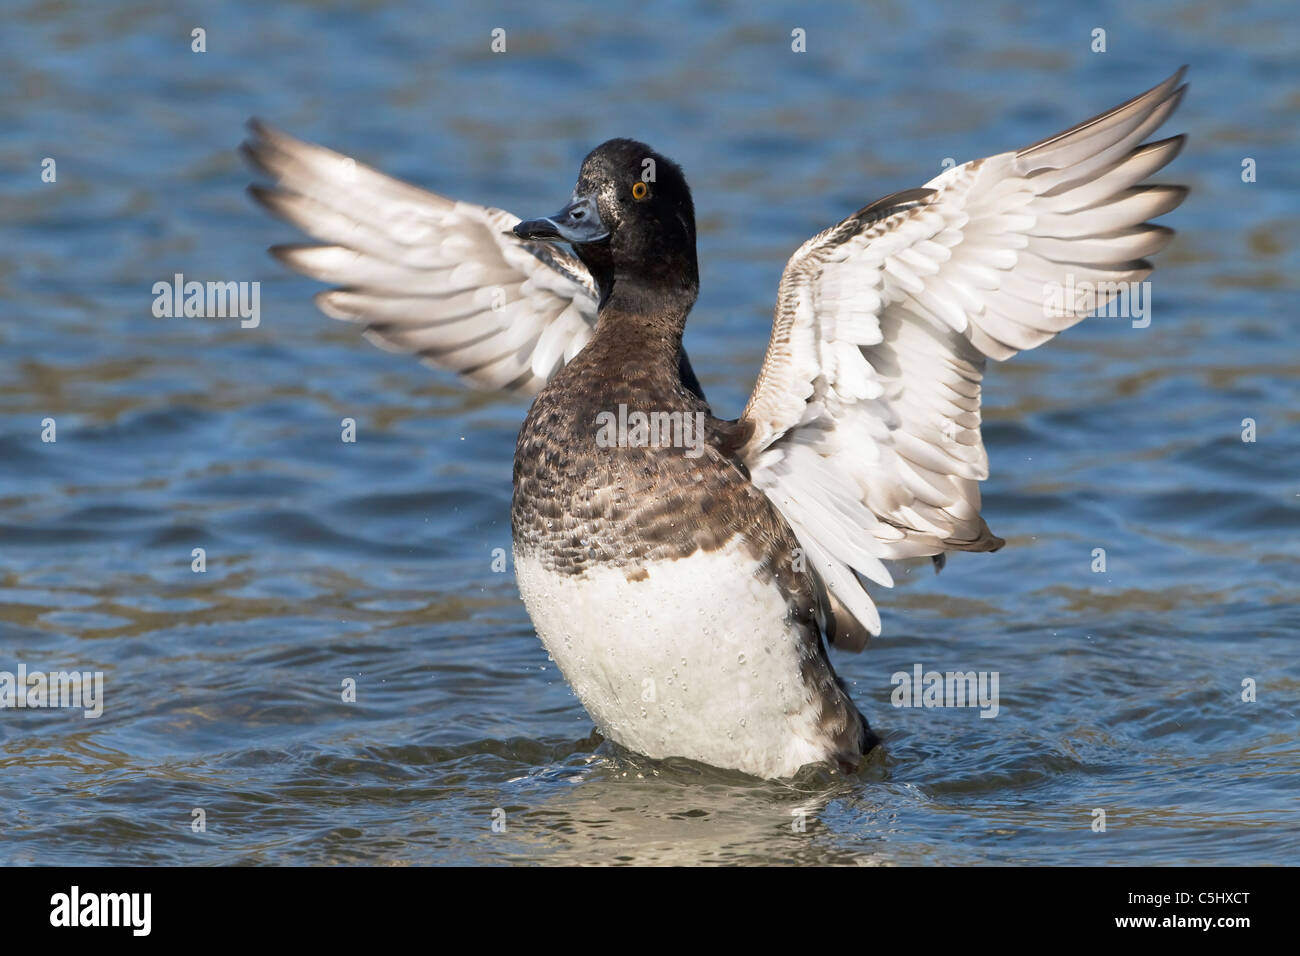 A female Tufted Duck flapping its wings after preening Stock Photo